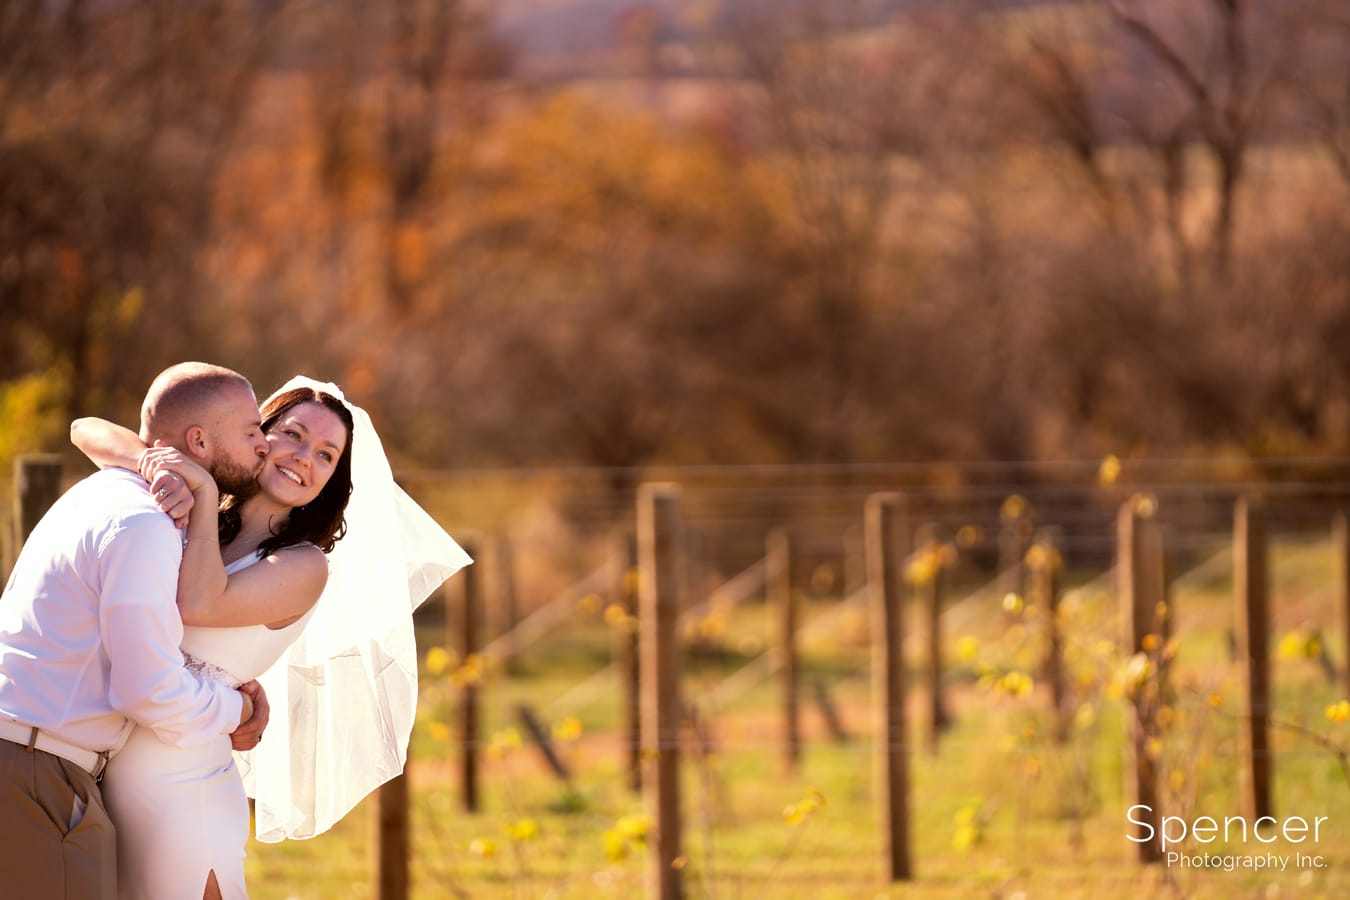 You are currently viewing Brian & Ashlee’s Wedding Ceremony at White Timbers Winery